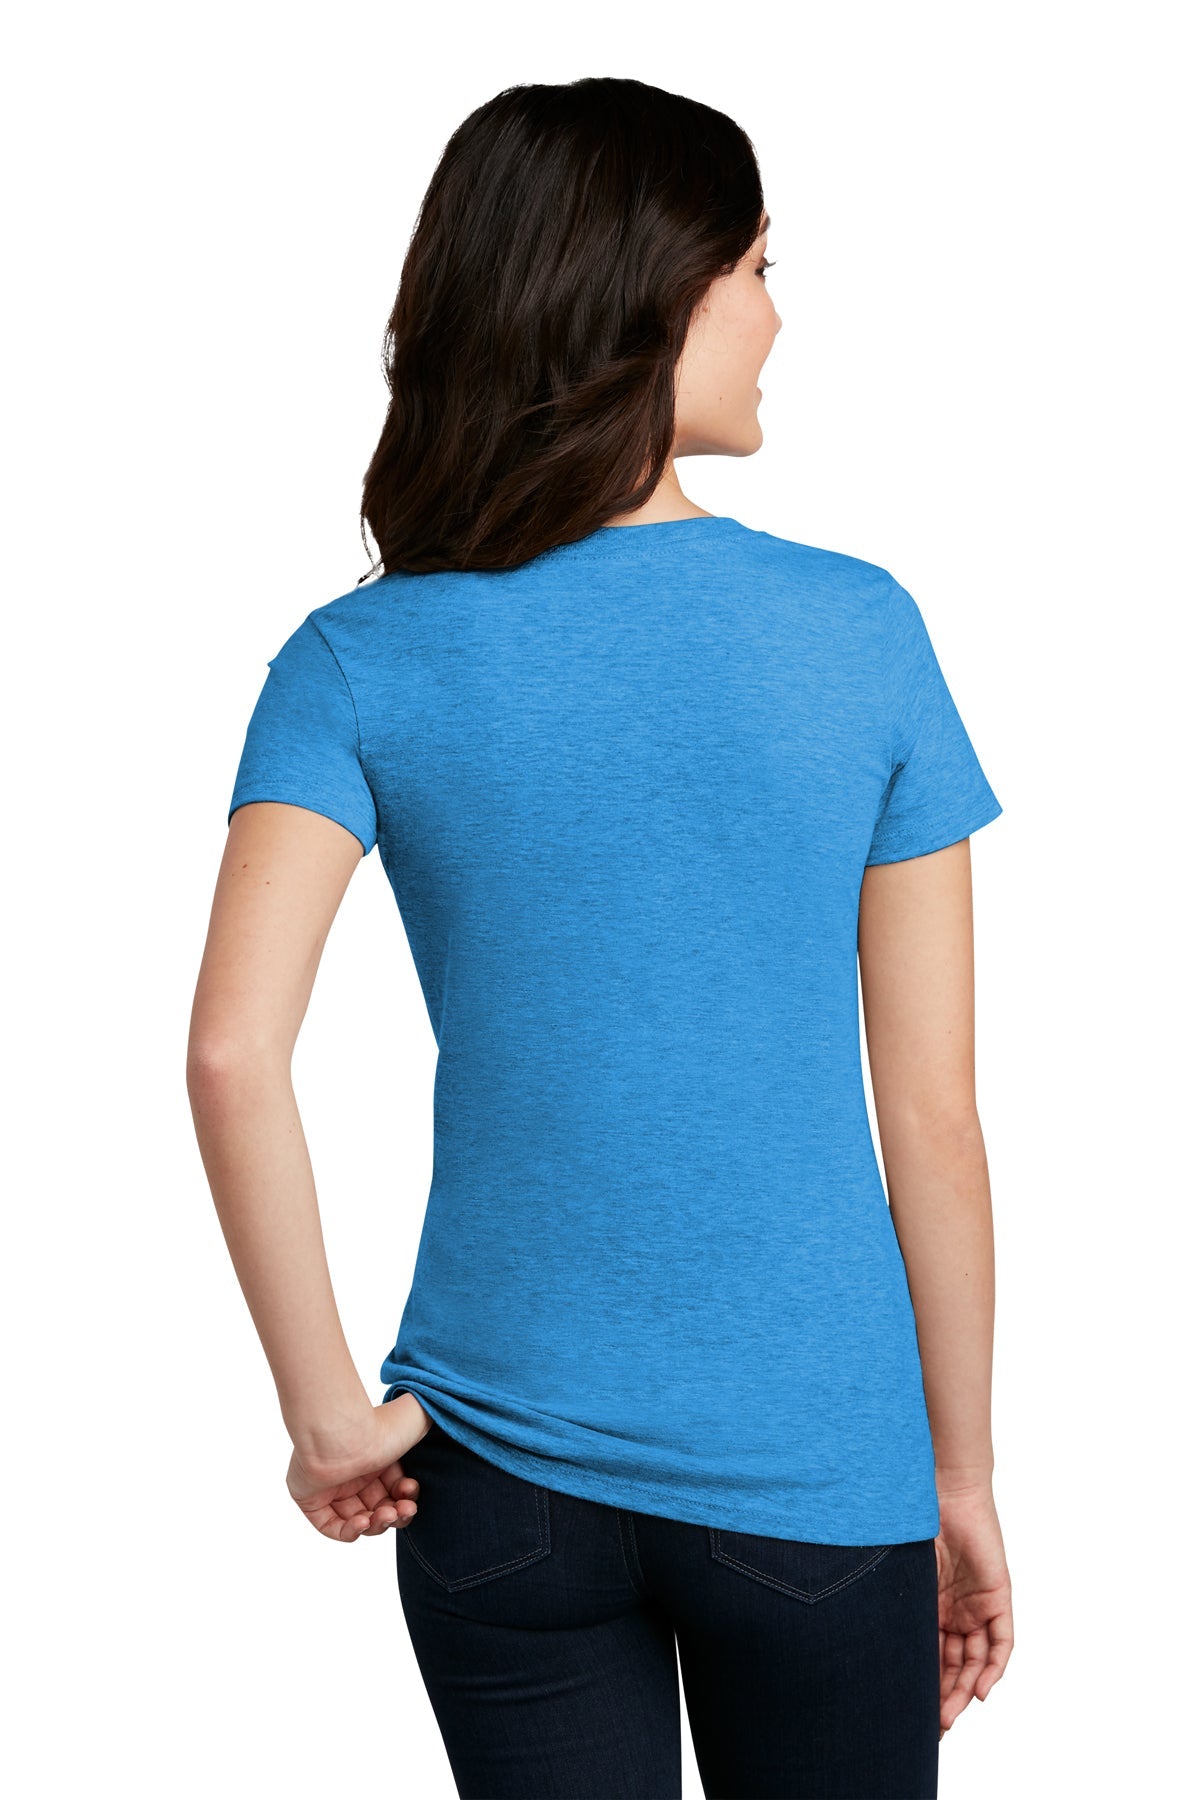 District Made Ladies Perfect Blend Crew Tee's, Heathered Bright Turquoise